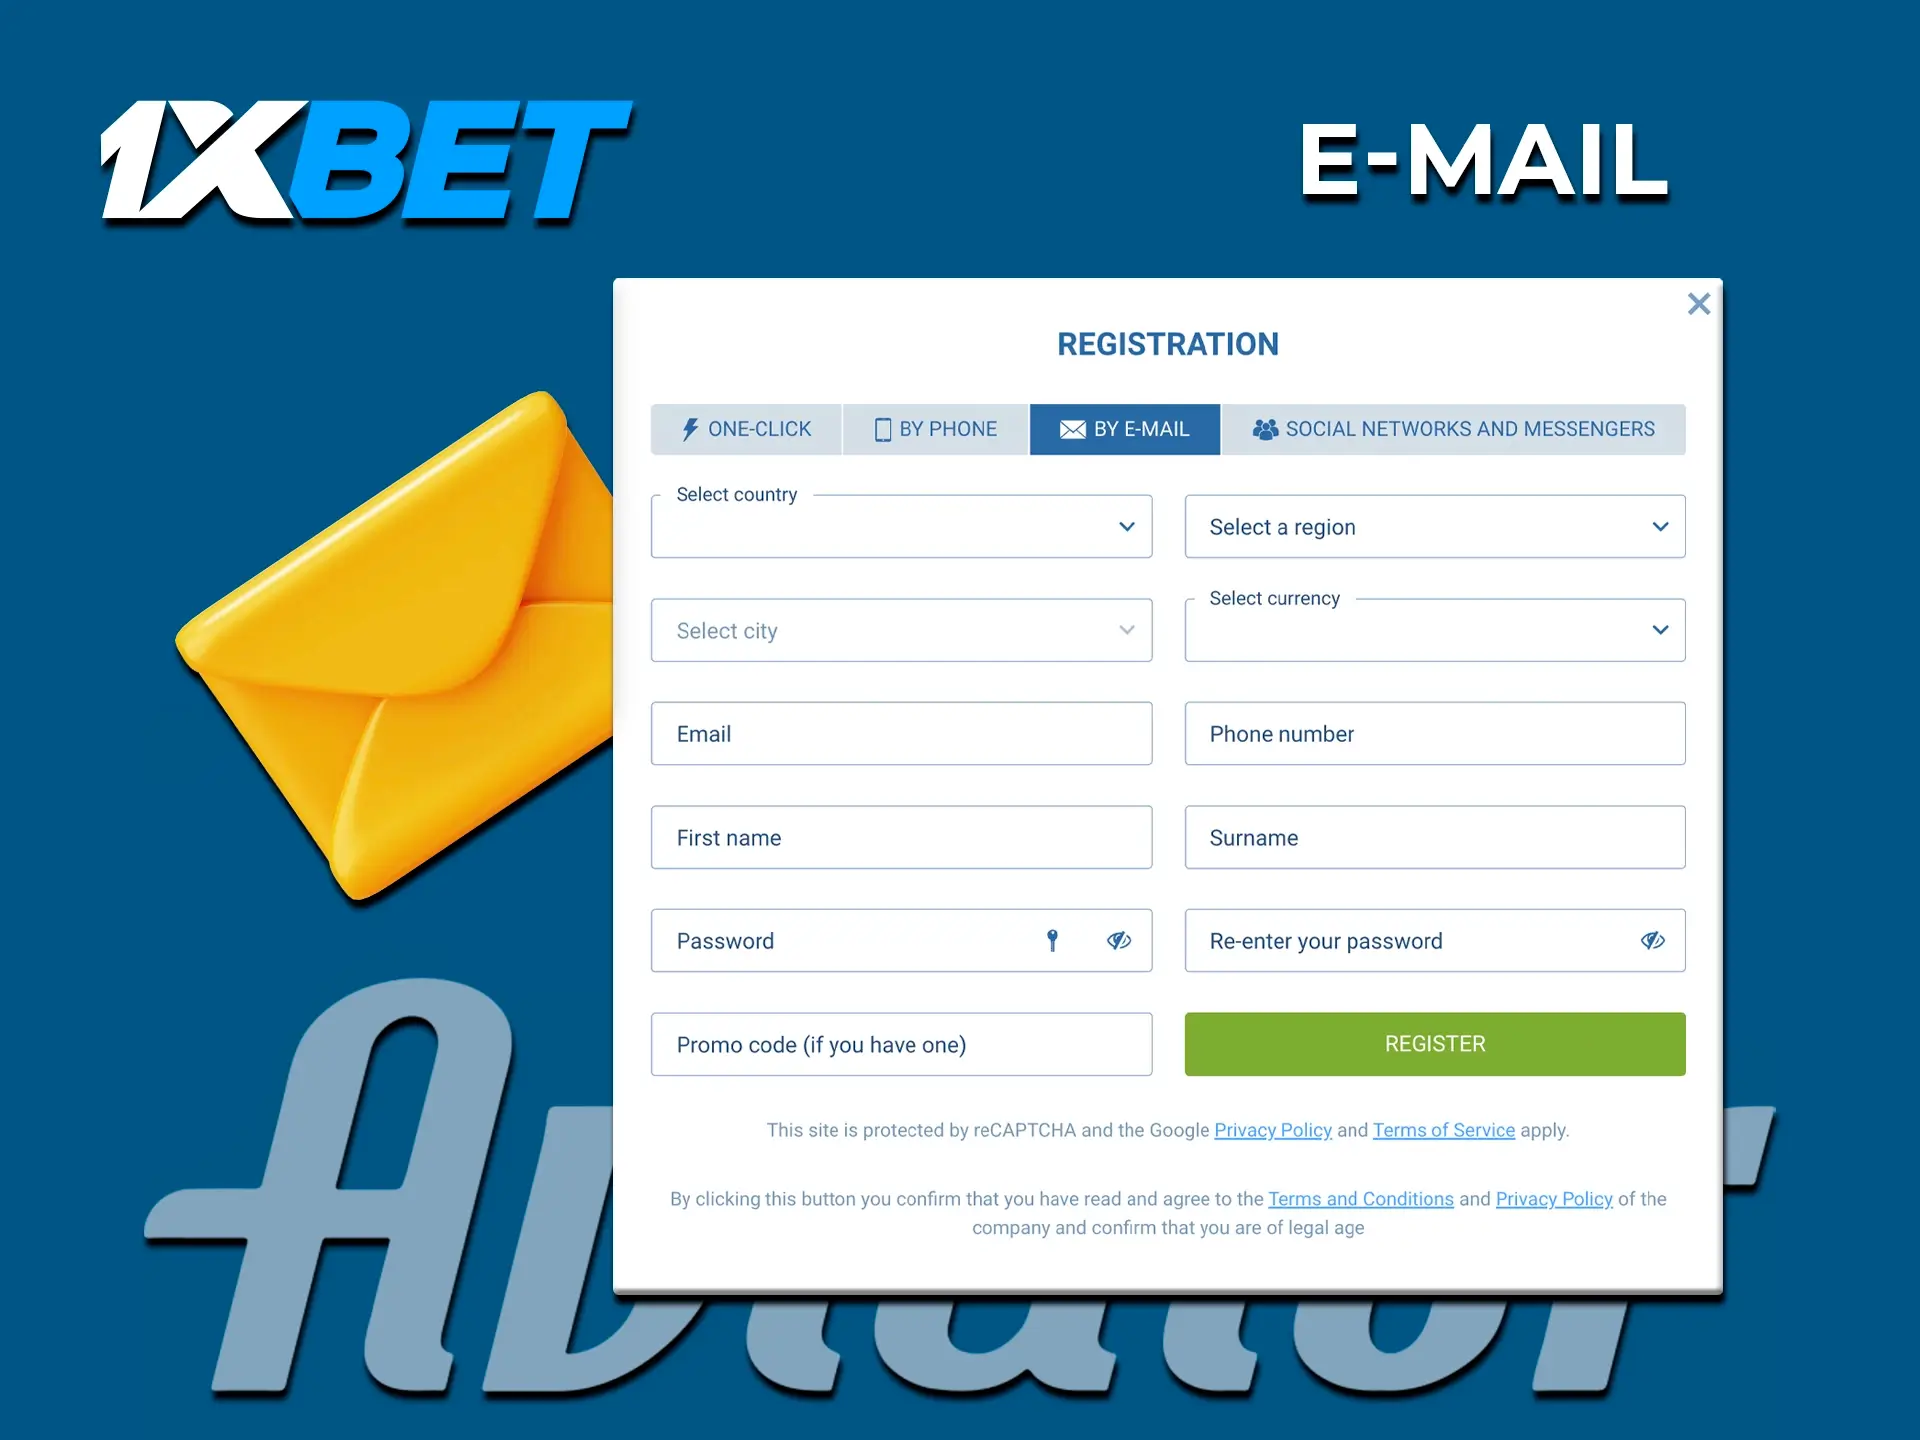 Use your email to register and fully immerse yourself in 1xBet's Aviator game.